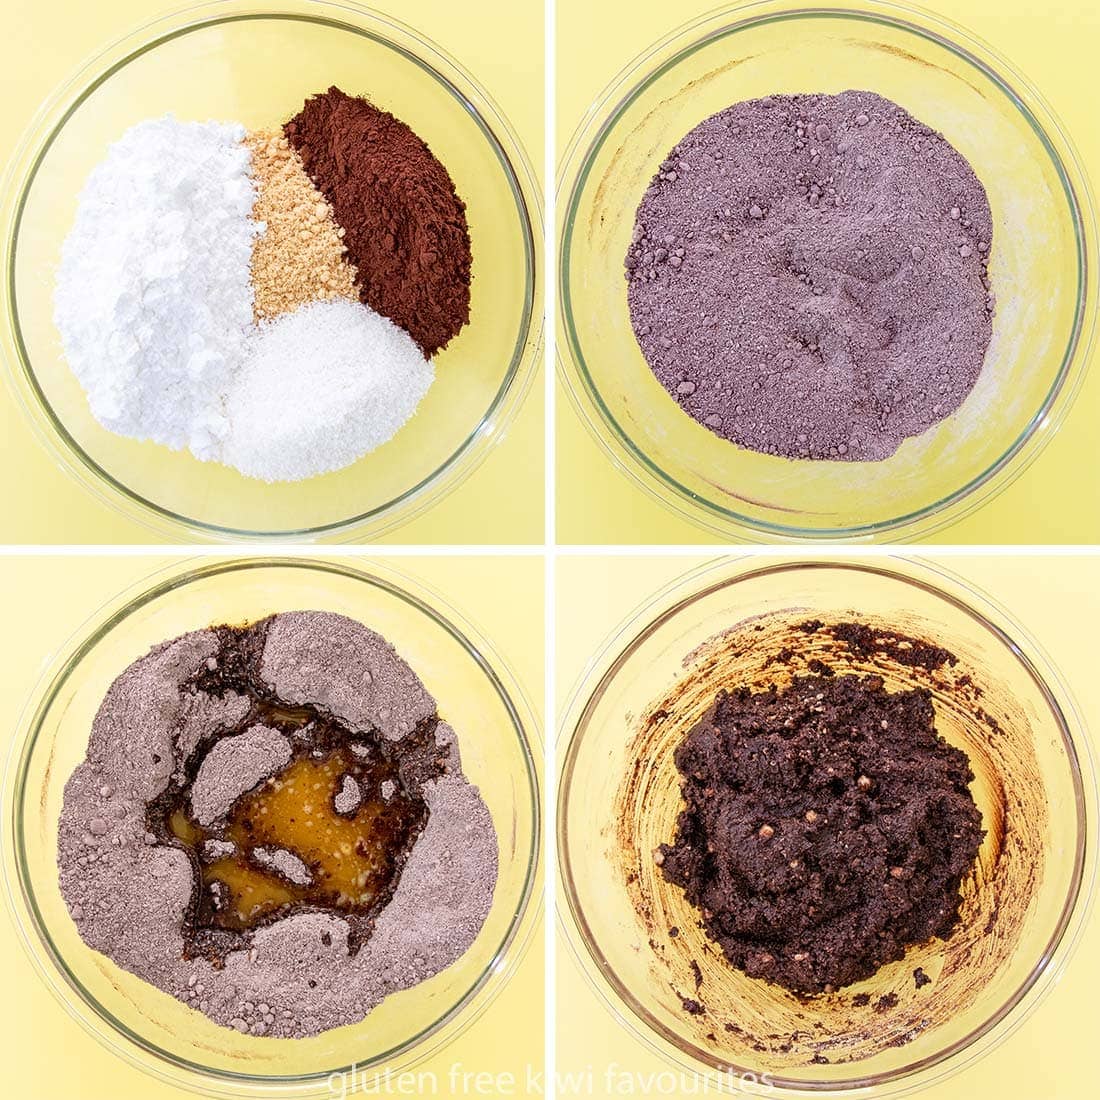 Collage showing the process of making the rum balls.